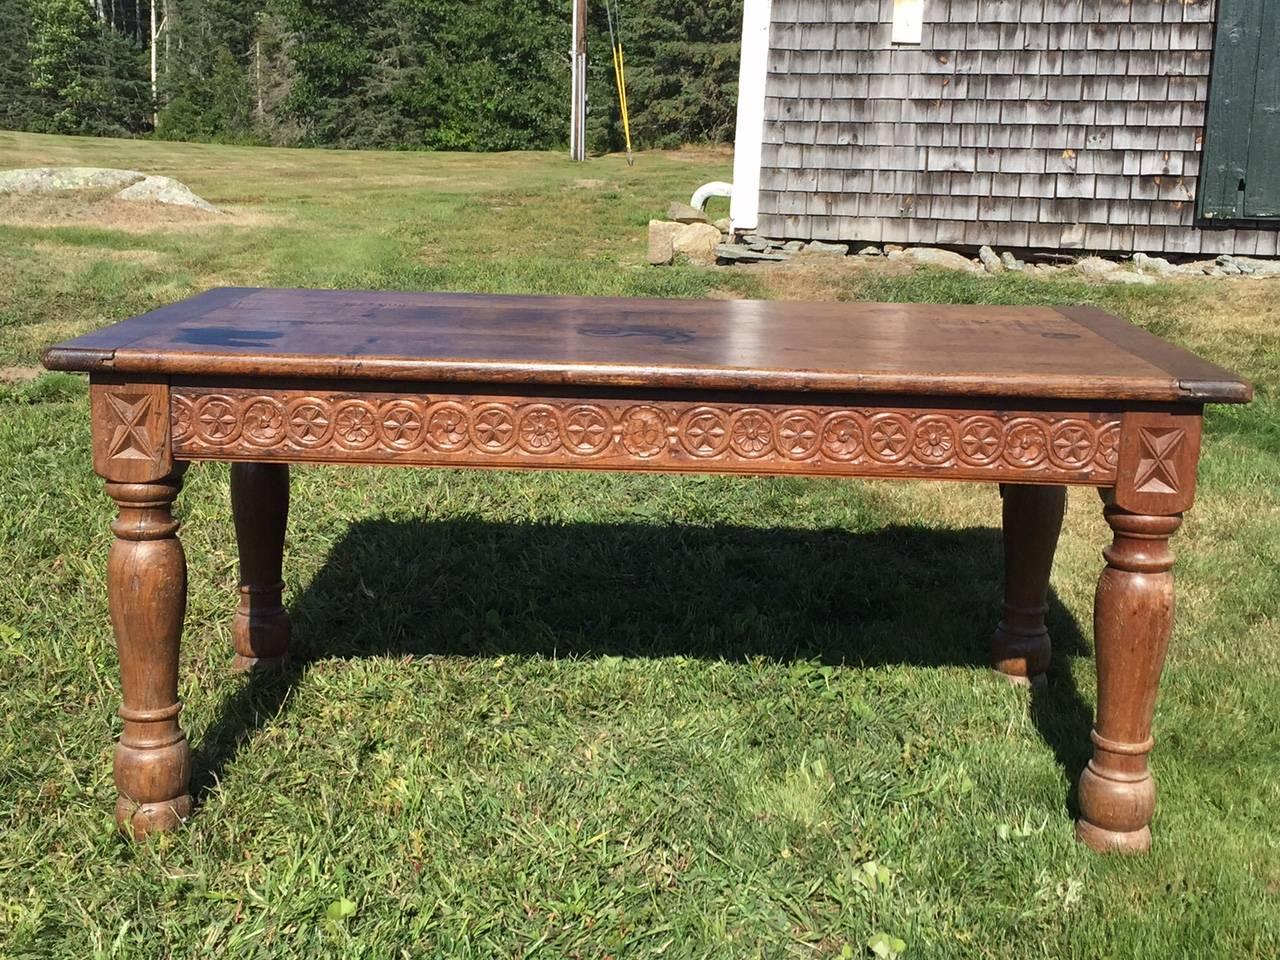 100 year old, charming French oak country table from Provence. Note marks on top, which are not indented-- just ink. Adds to its rustic character. Lovely carving around the apron and on the legs.   The apron height on the French country table is 23